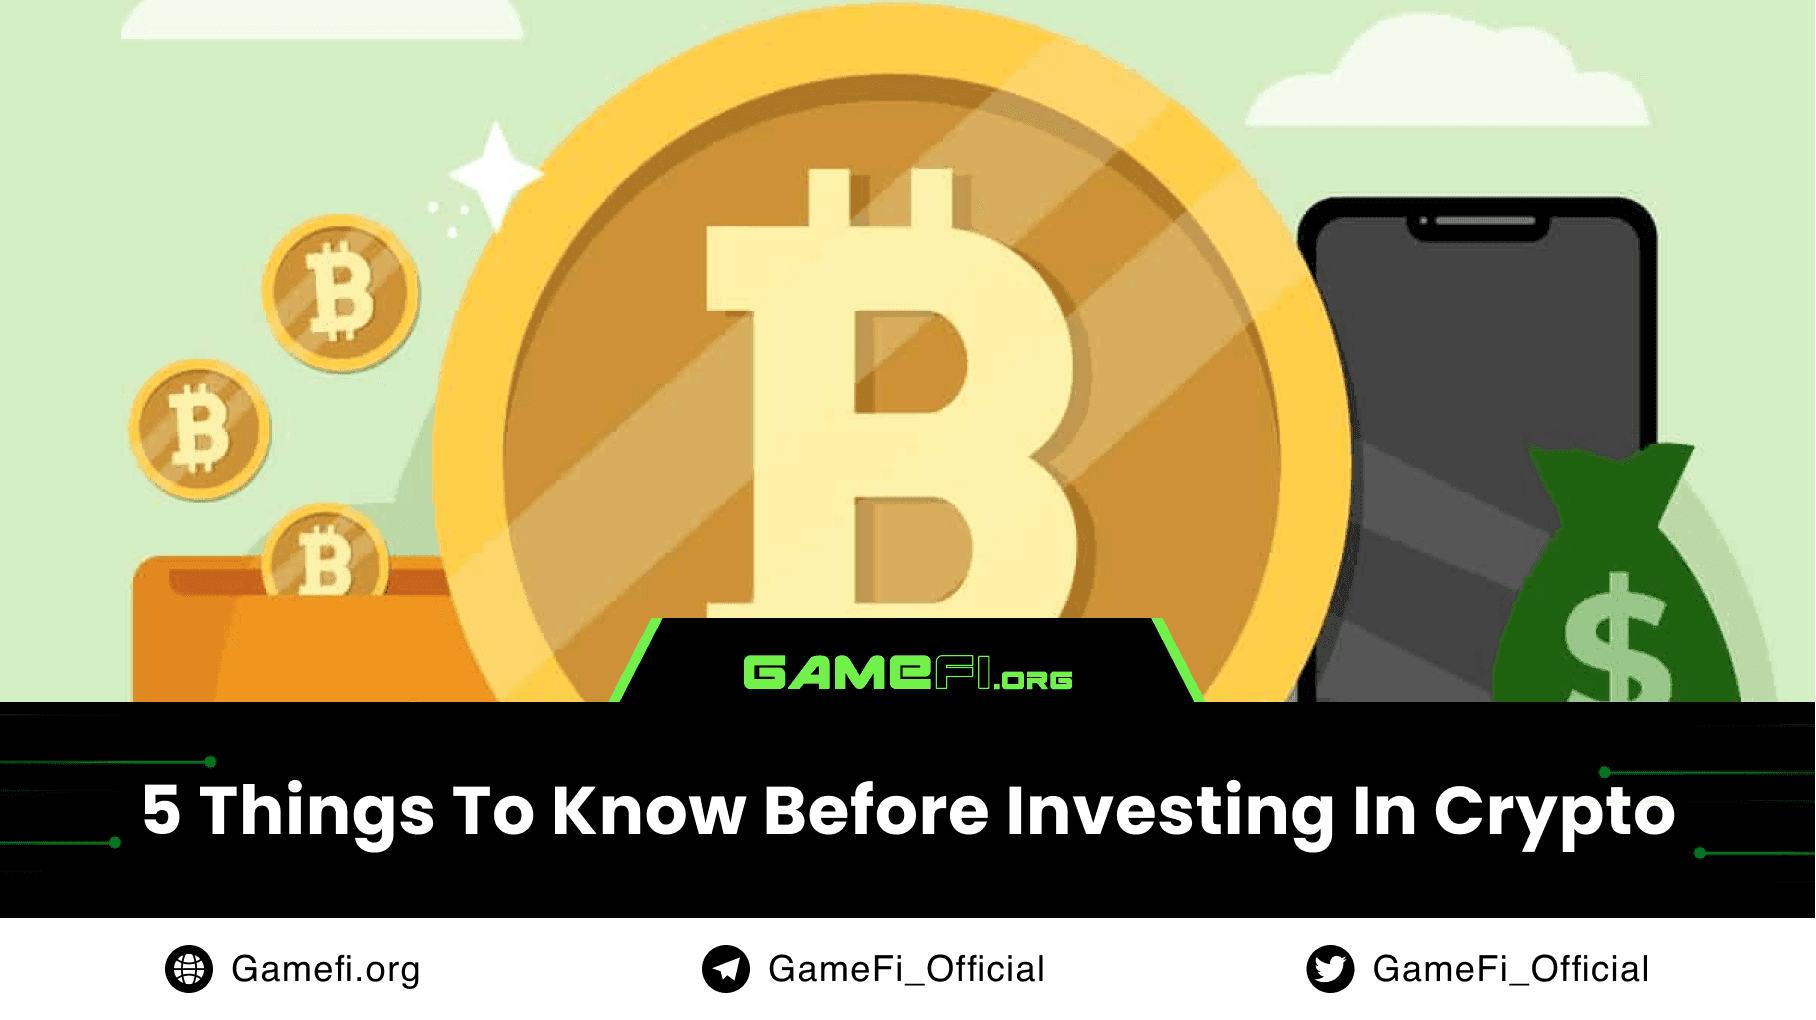 5 Things You Should Know Before Investing In Crypto